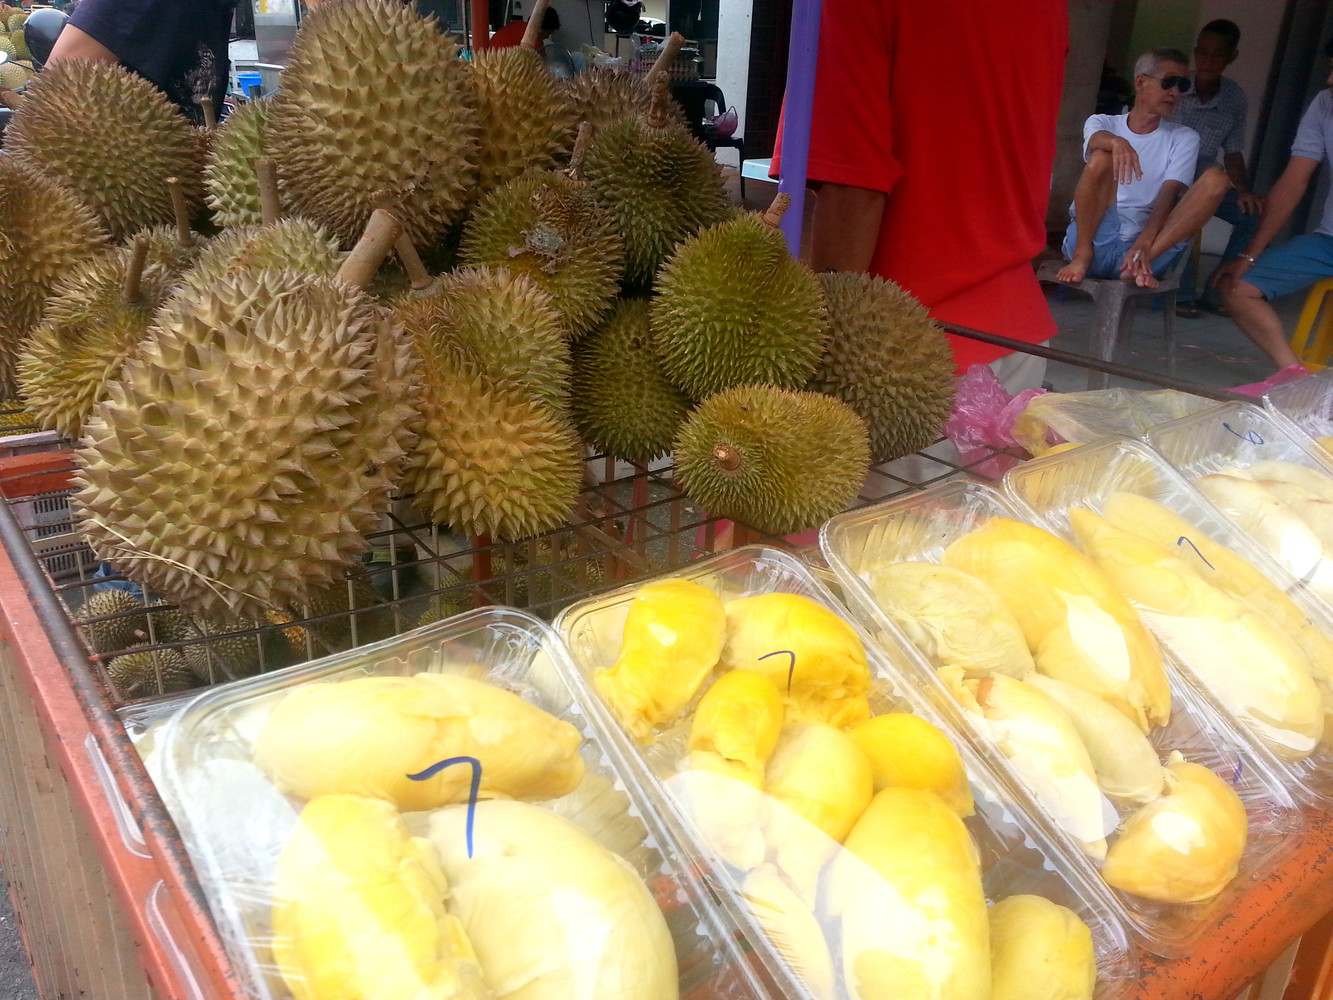 Whole and sliced durians for sale at a street side stall